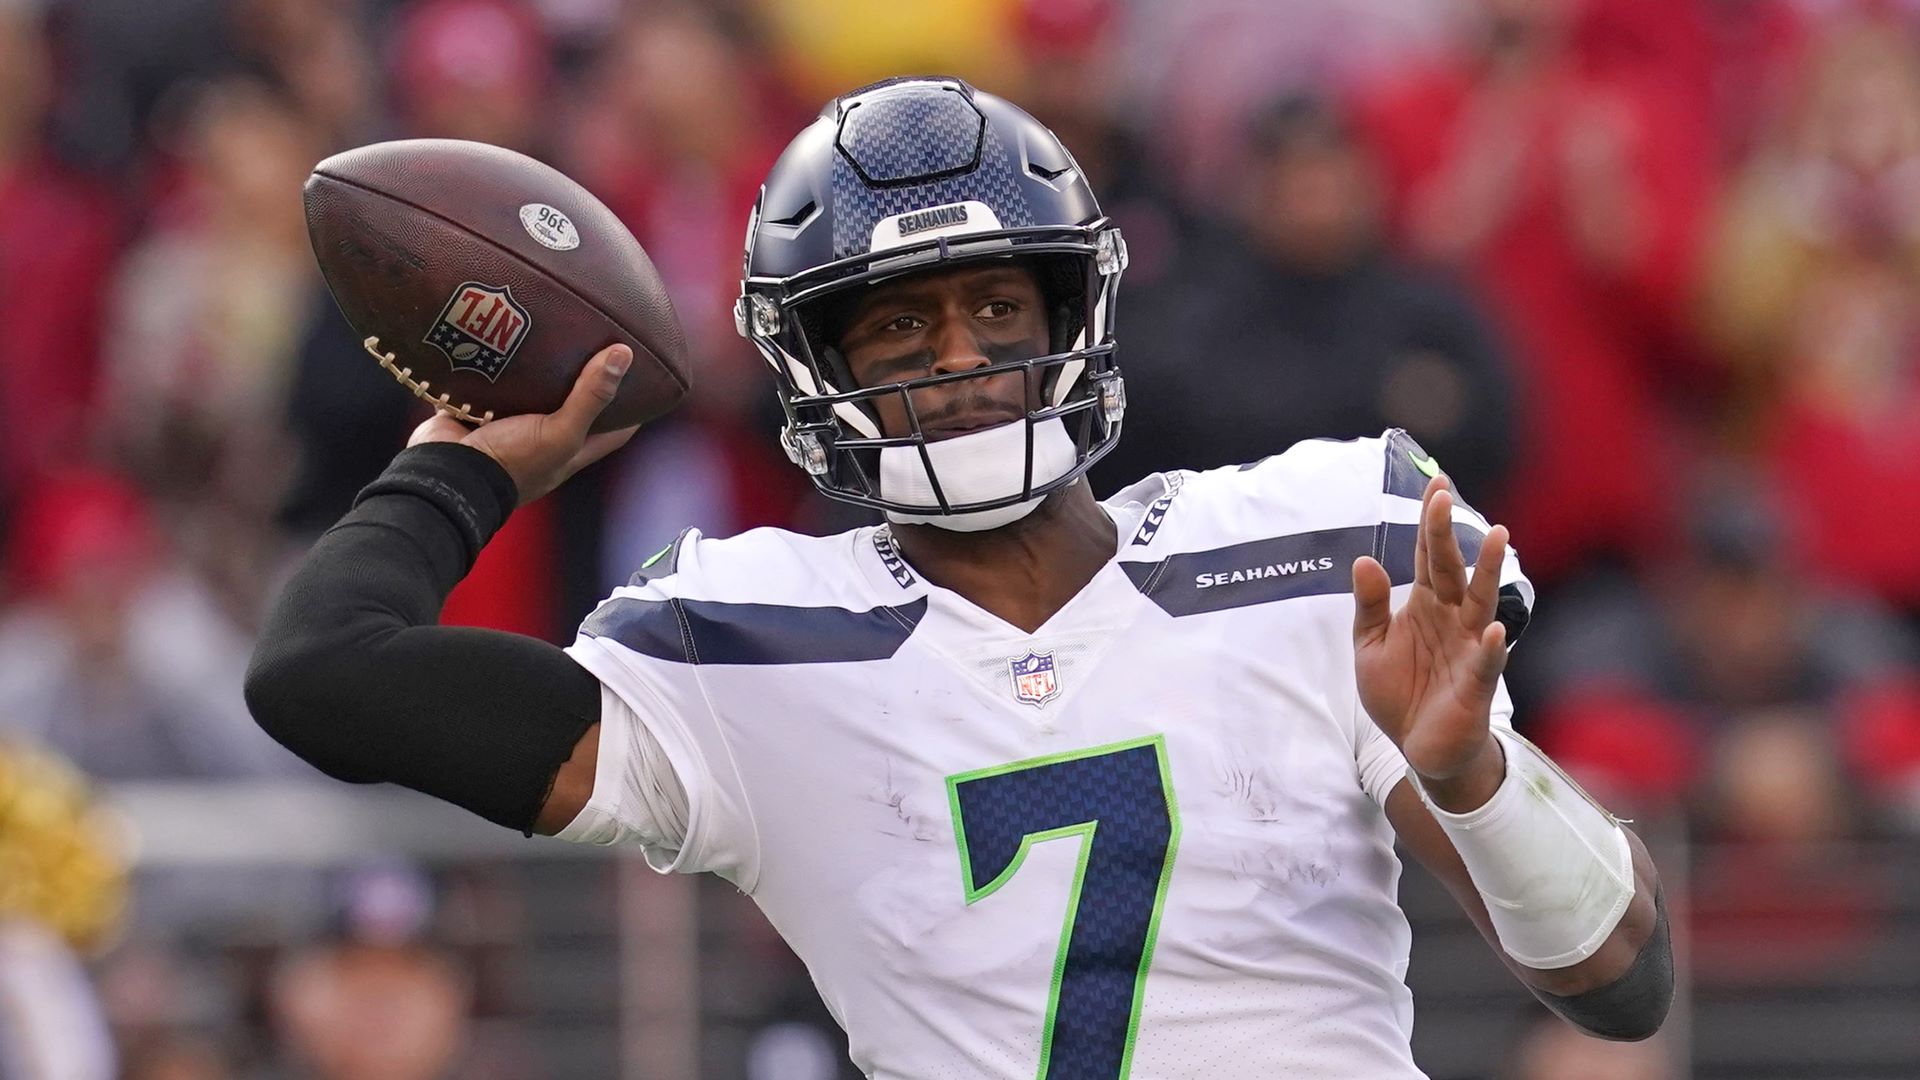 NESN Bets Kickoff: Seahawks Vs. Giants Monday Night Football Betting  Preview 